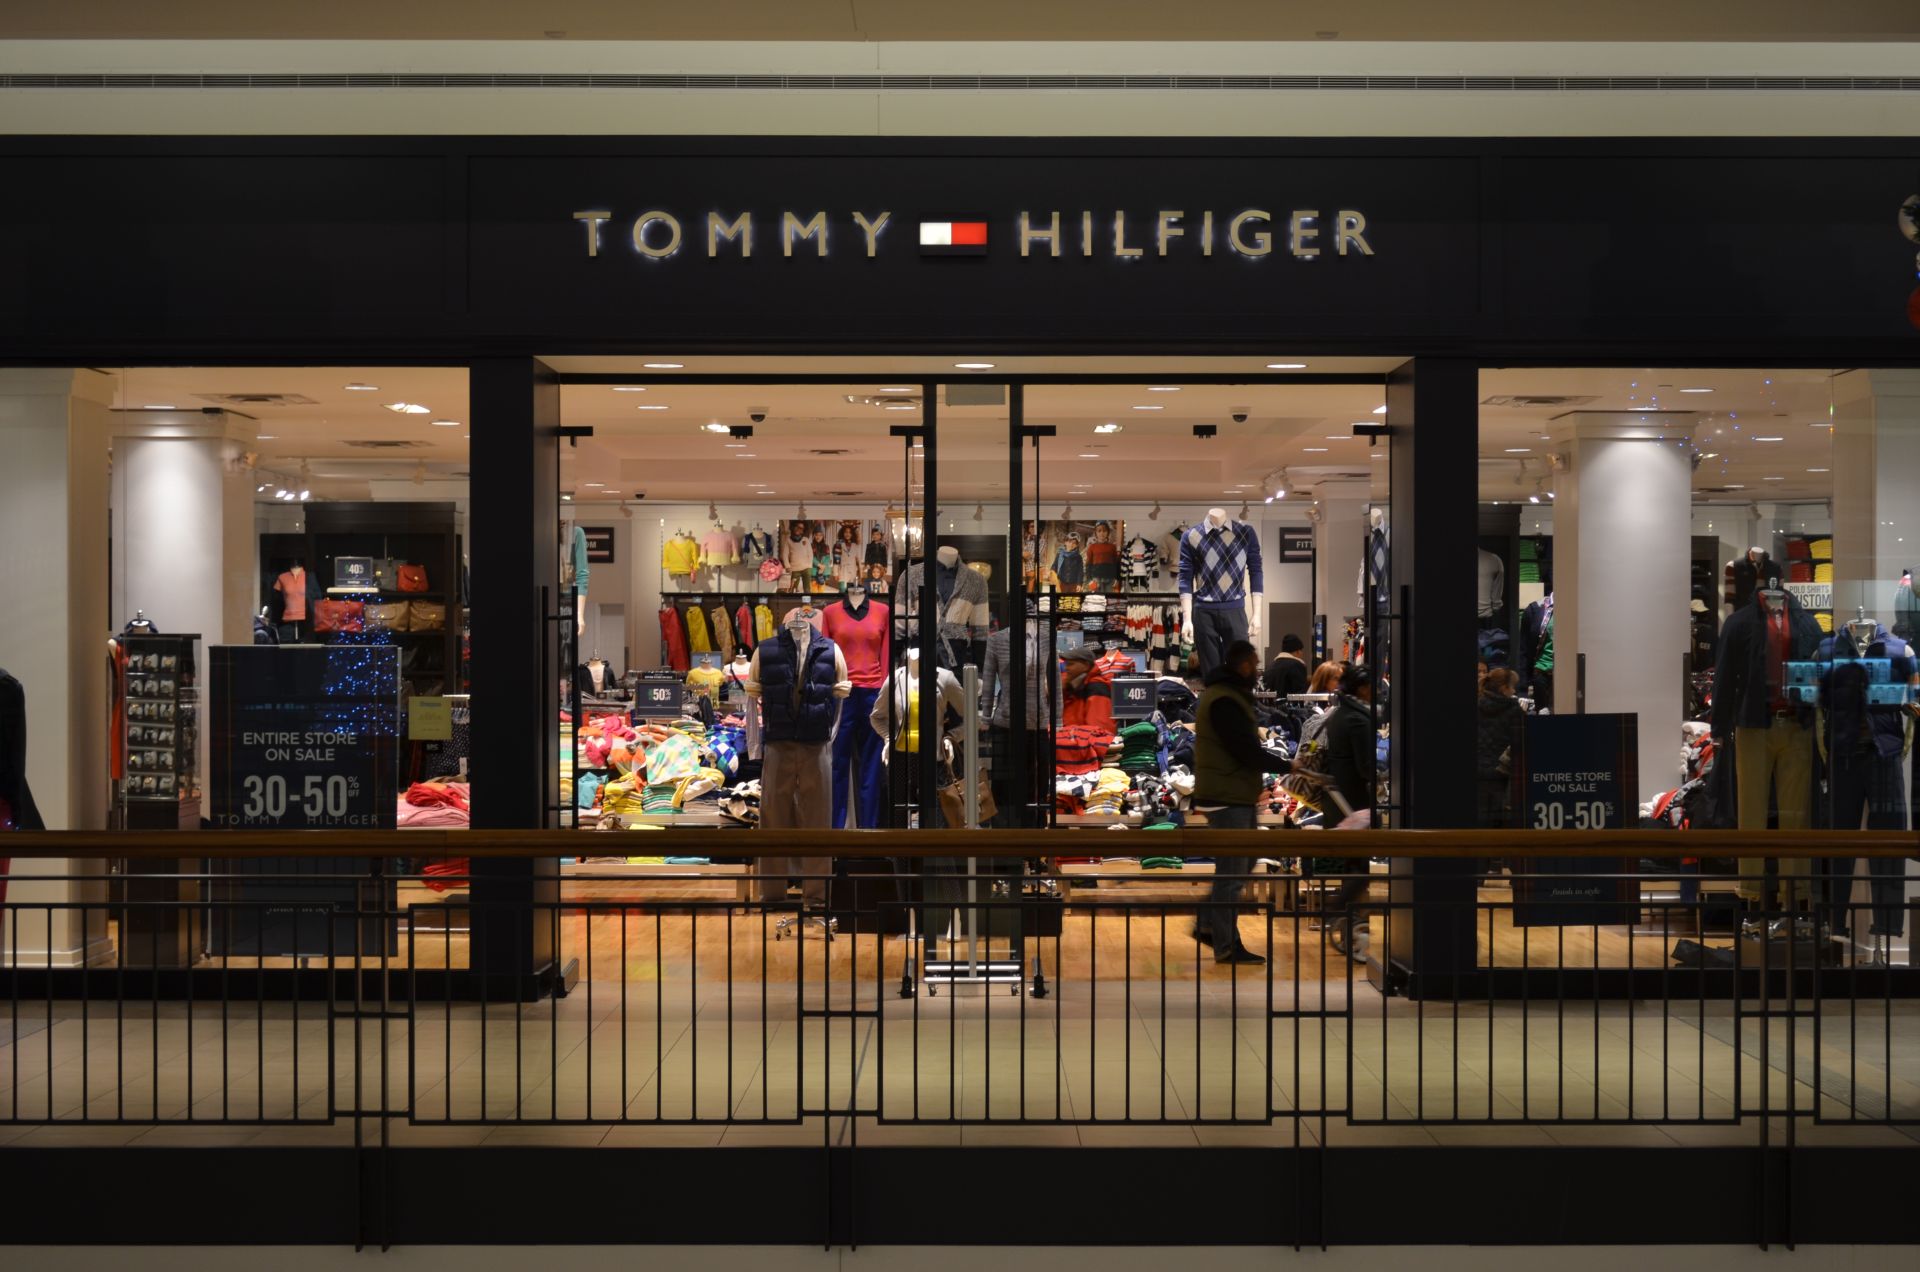 Tommy Hilfiger to open in Kohl’s stores